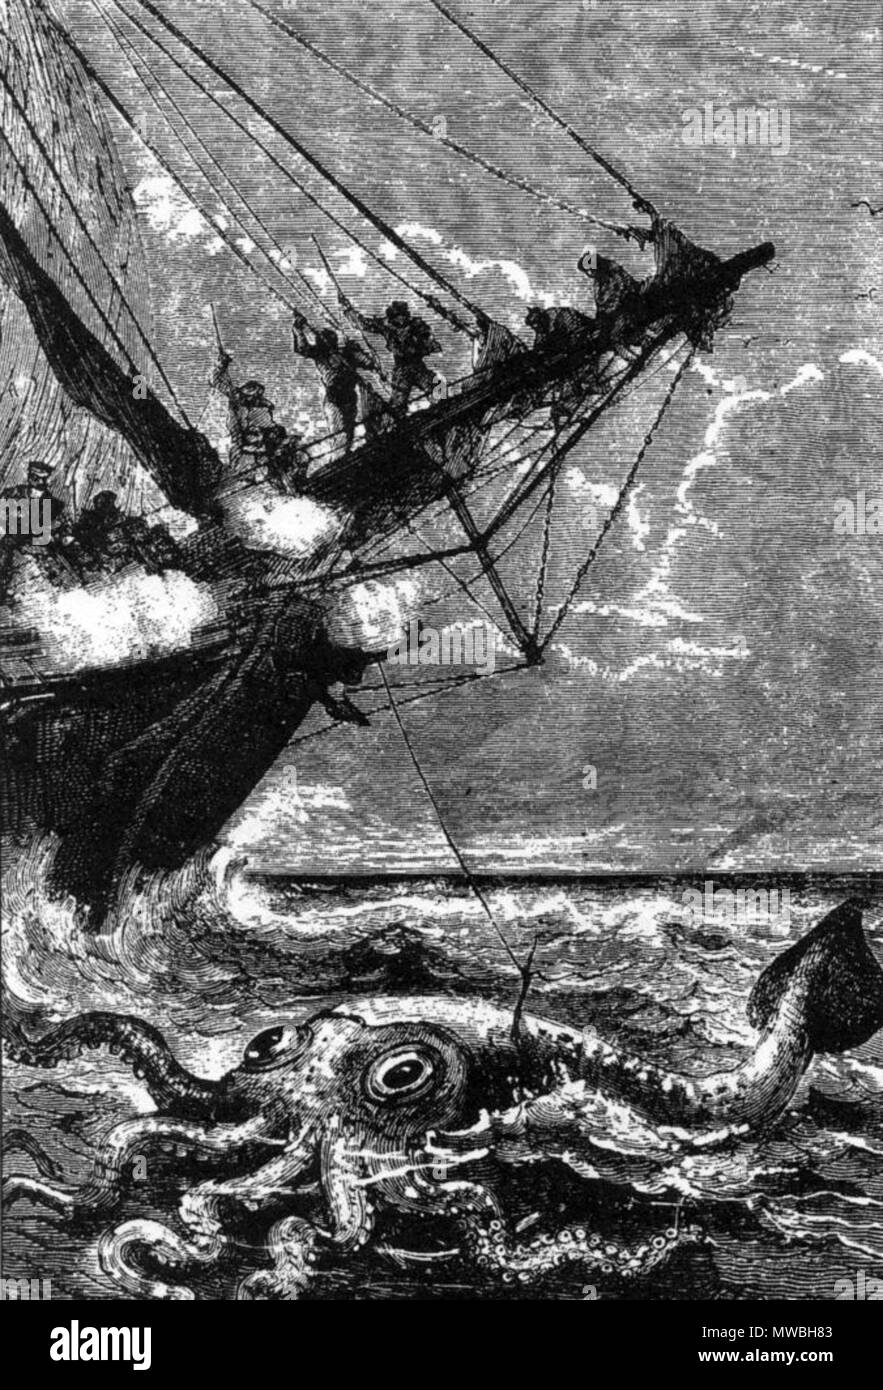 . Illustration of a giant squid from 20000 Lieues Sous les Mers by Jules Verne. 1870. Alphonse de Neuville and Edouard Riou 243 Giant squid twenty thousand leagues under the sea Stock Photo